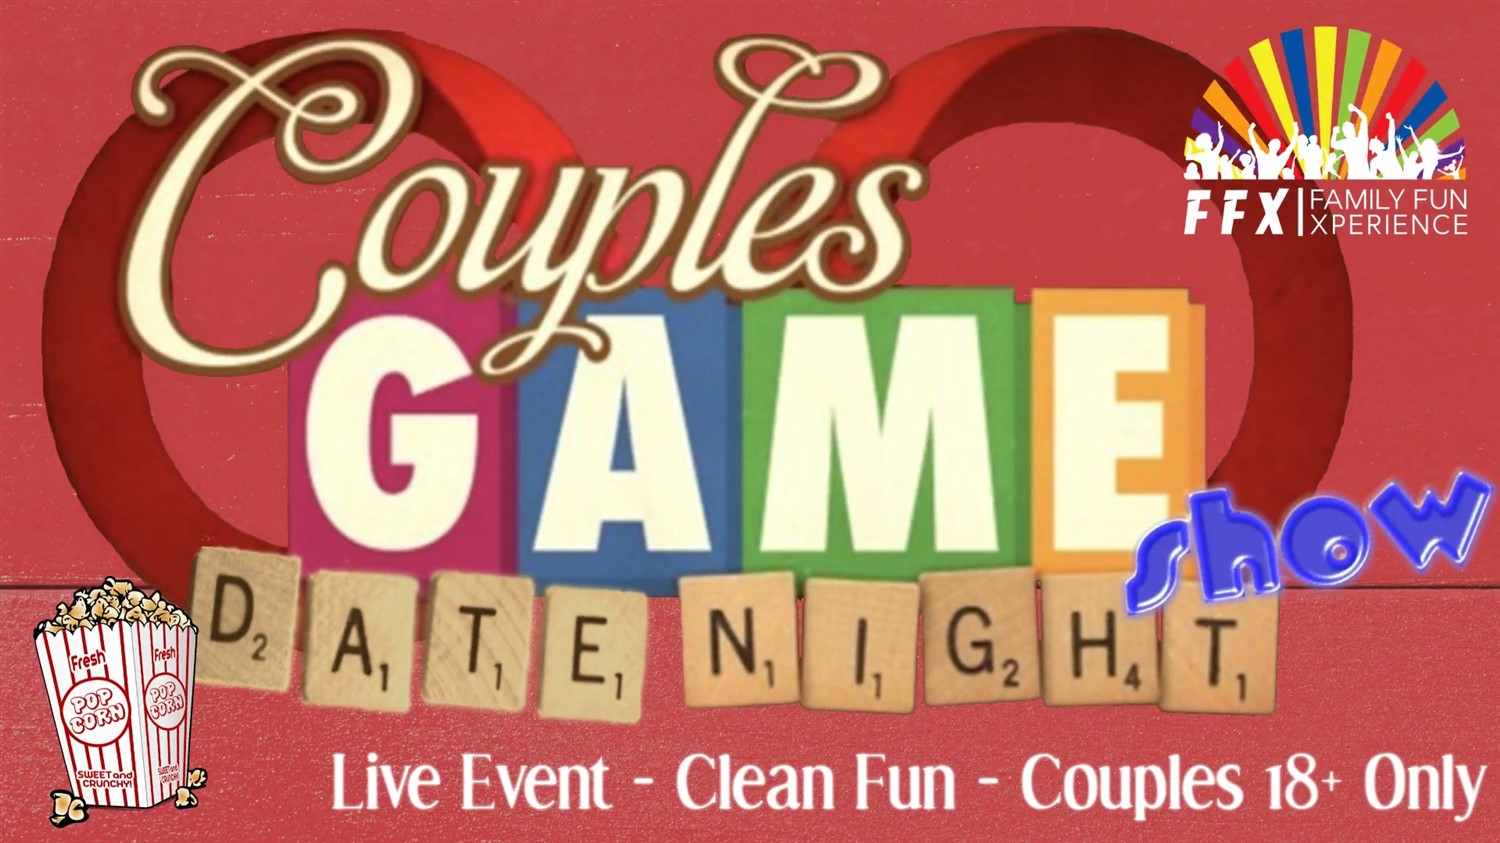 Couples Date Night Game Show! Live - Couples Only - FUN! on Jul 07, 19:00@FFX Theatre - Pick a seat, Buy tickets and Get information on Family Fun Xperience tickets.ffxshow.org